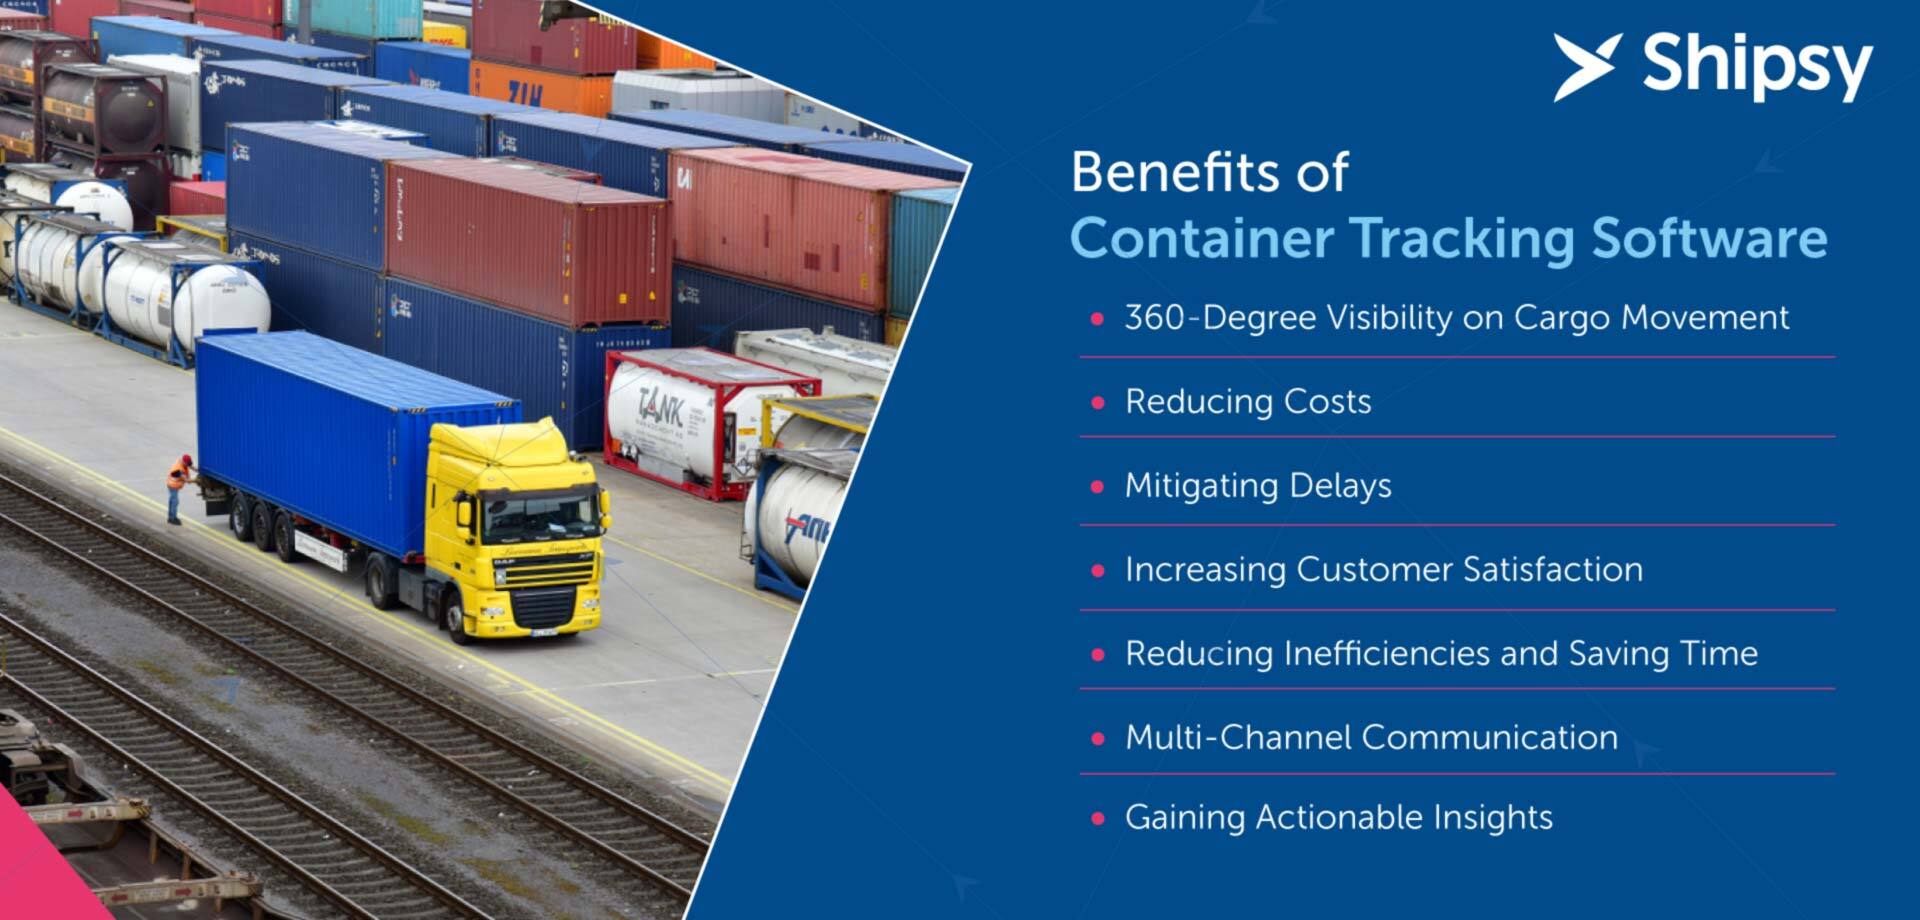 container tracking software benefits